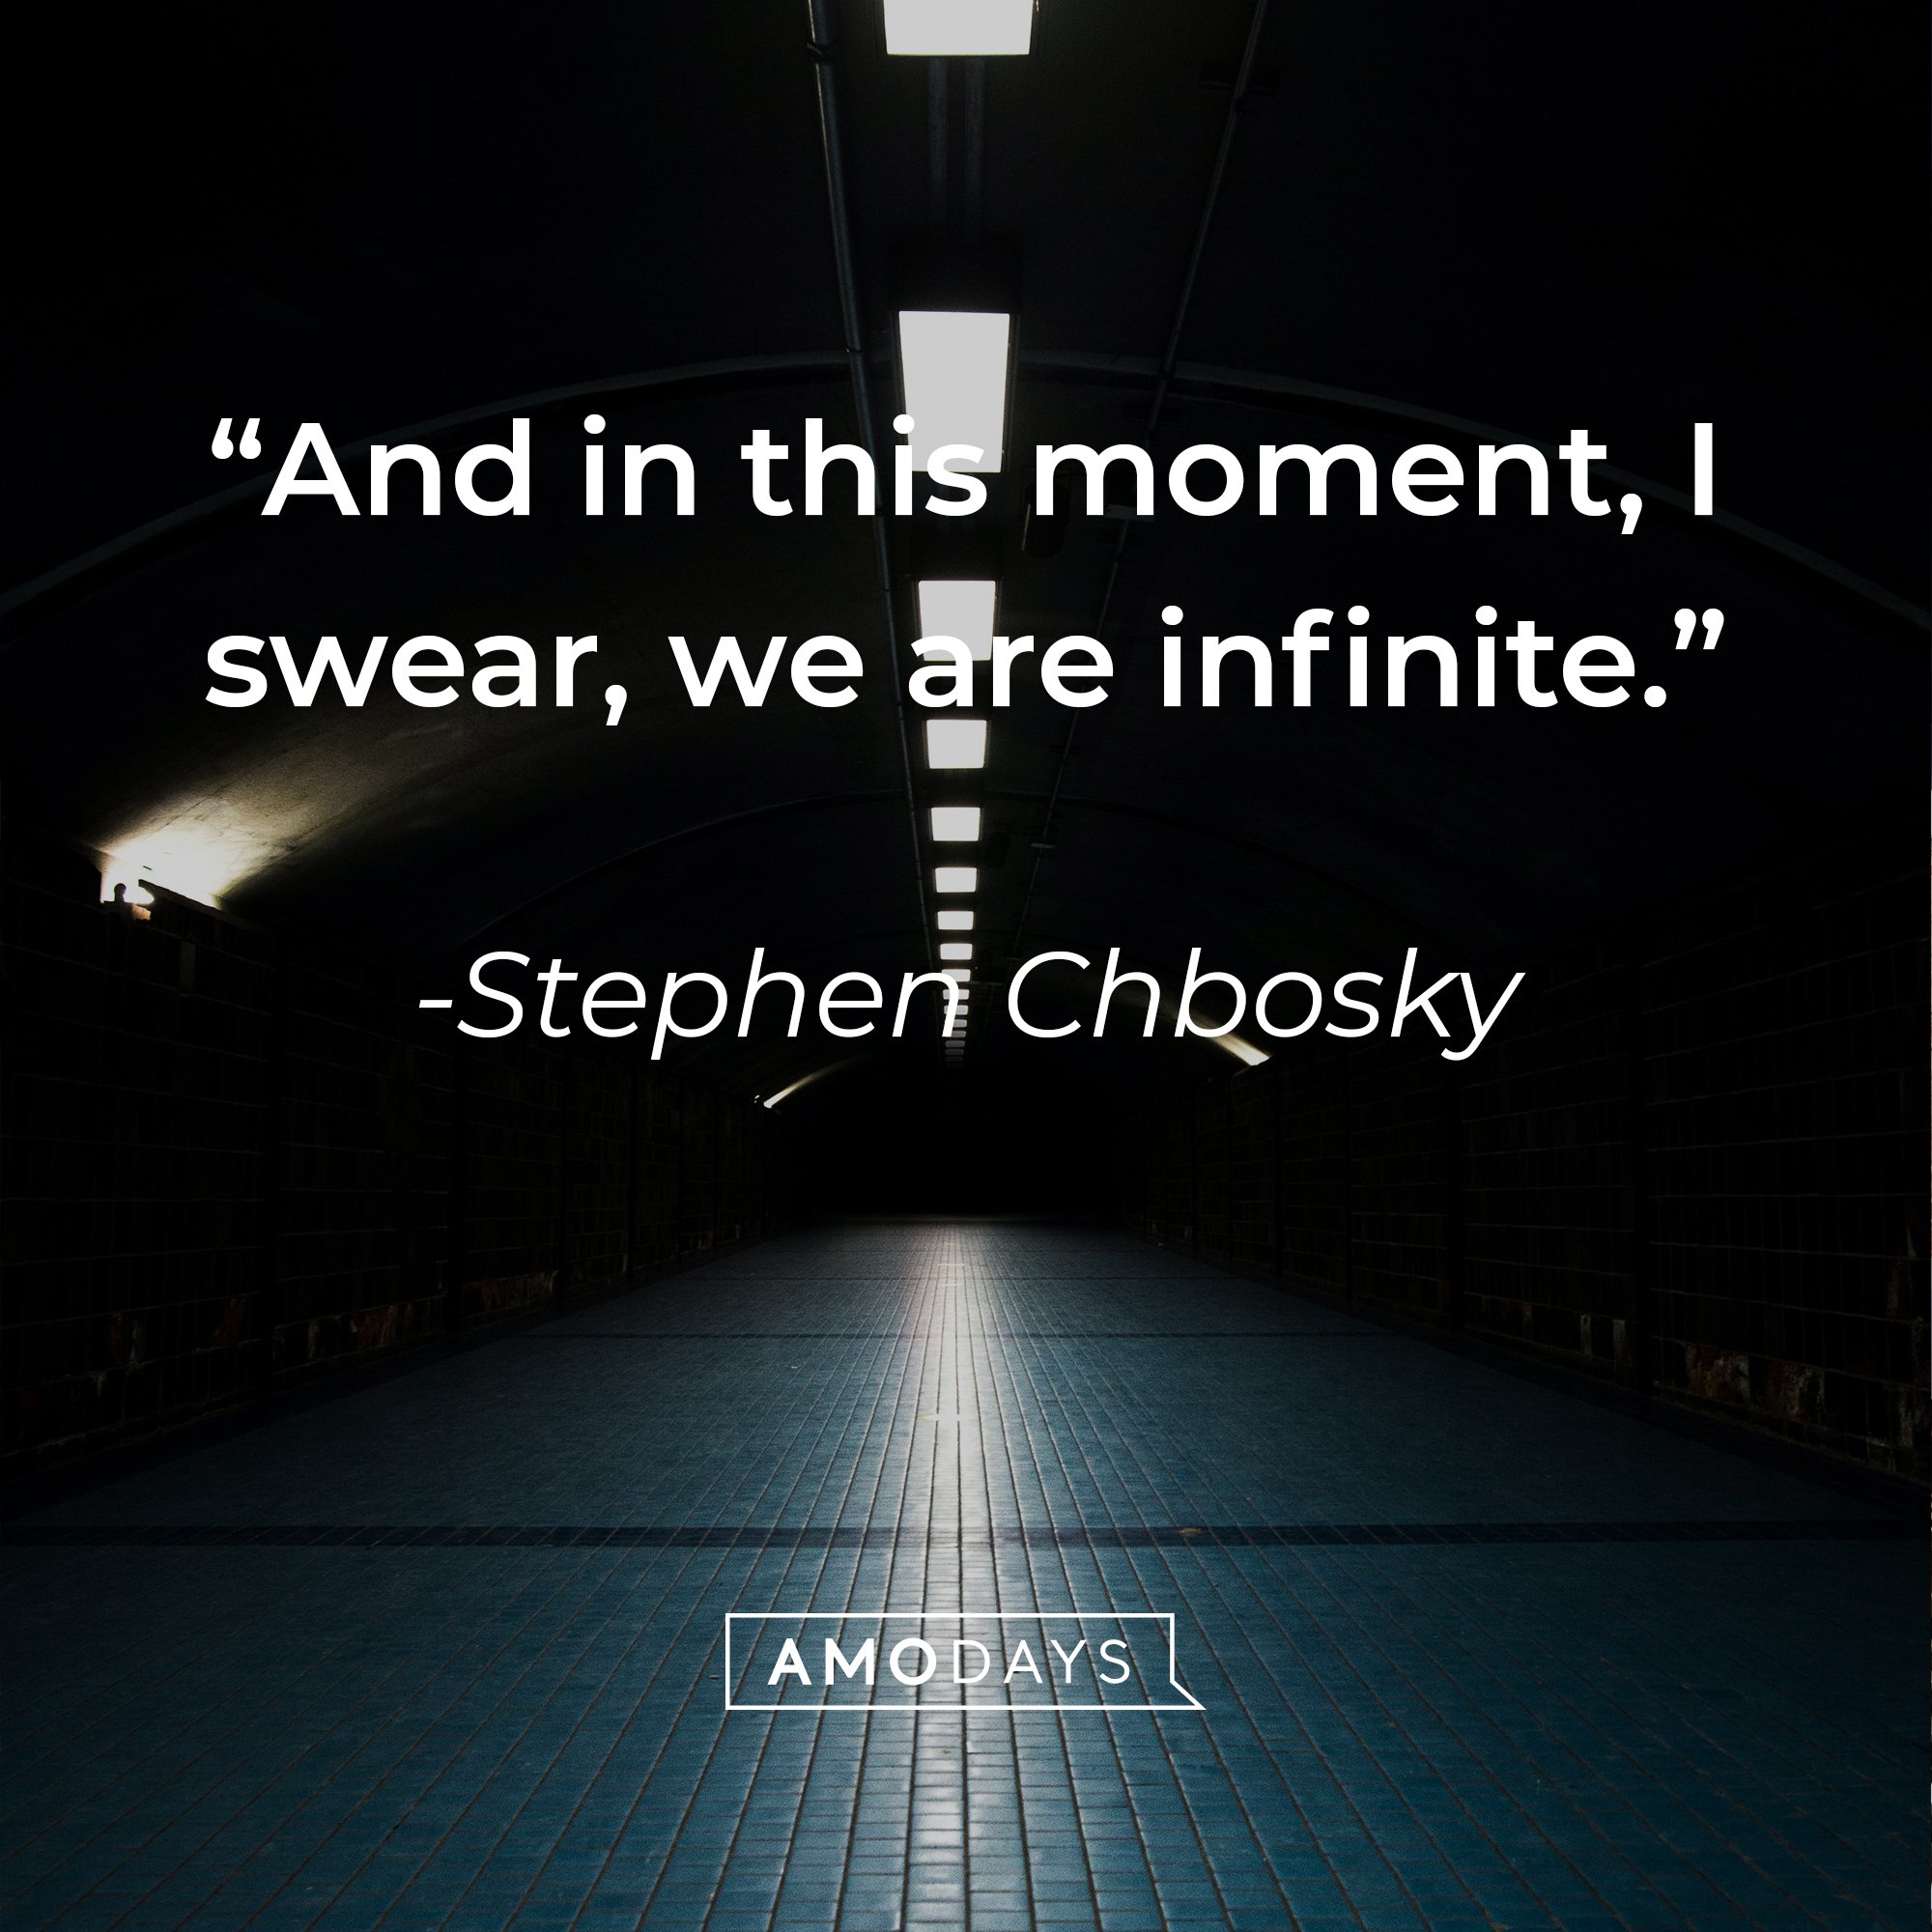 Stephen Chbosky’s quote: “And in this moment, I swear, we are infinite.” | Image: Amodays